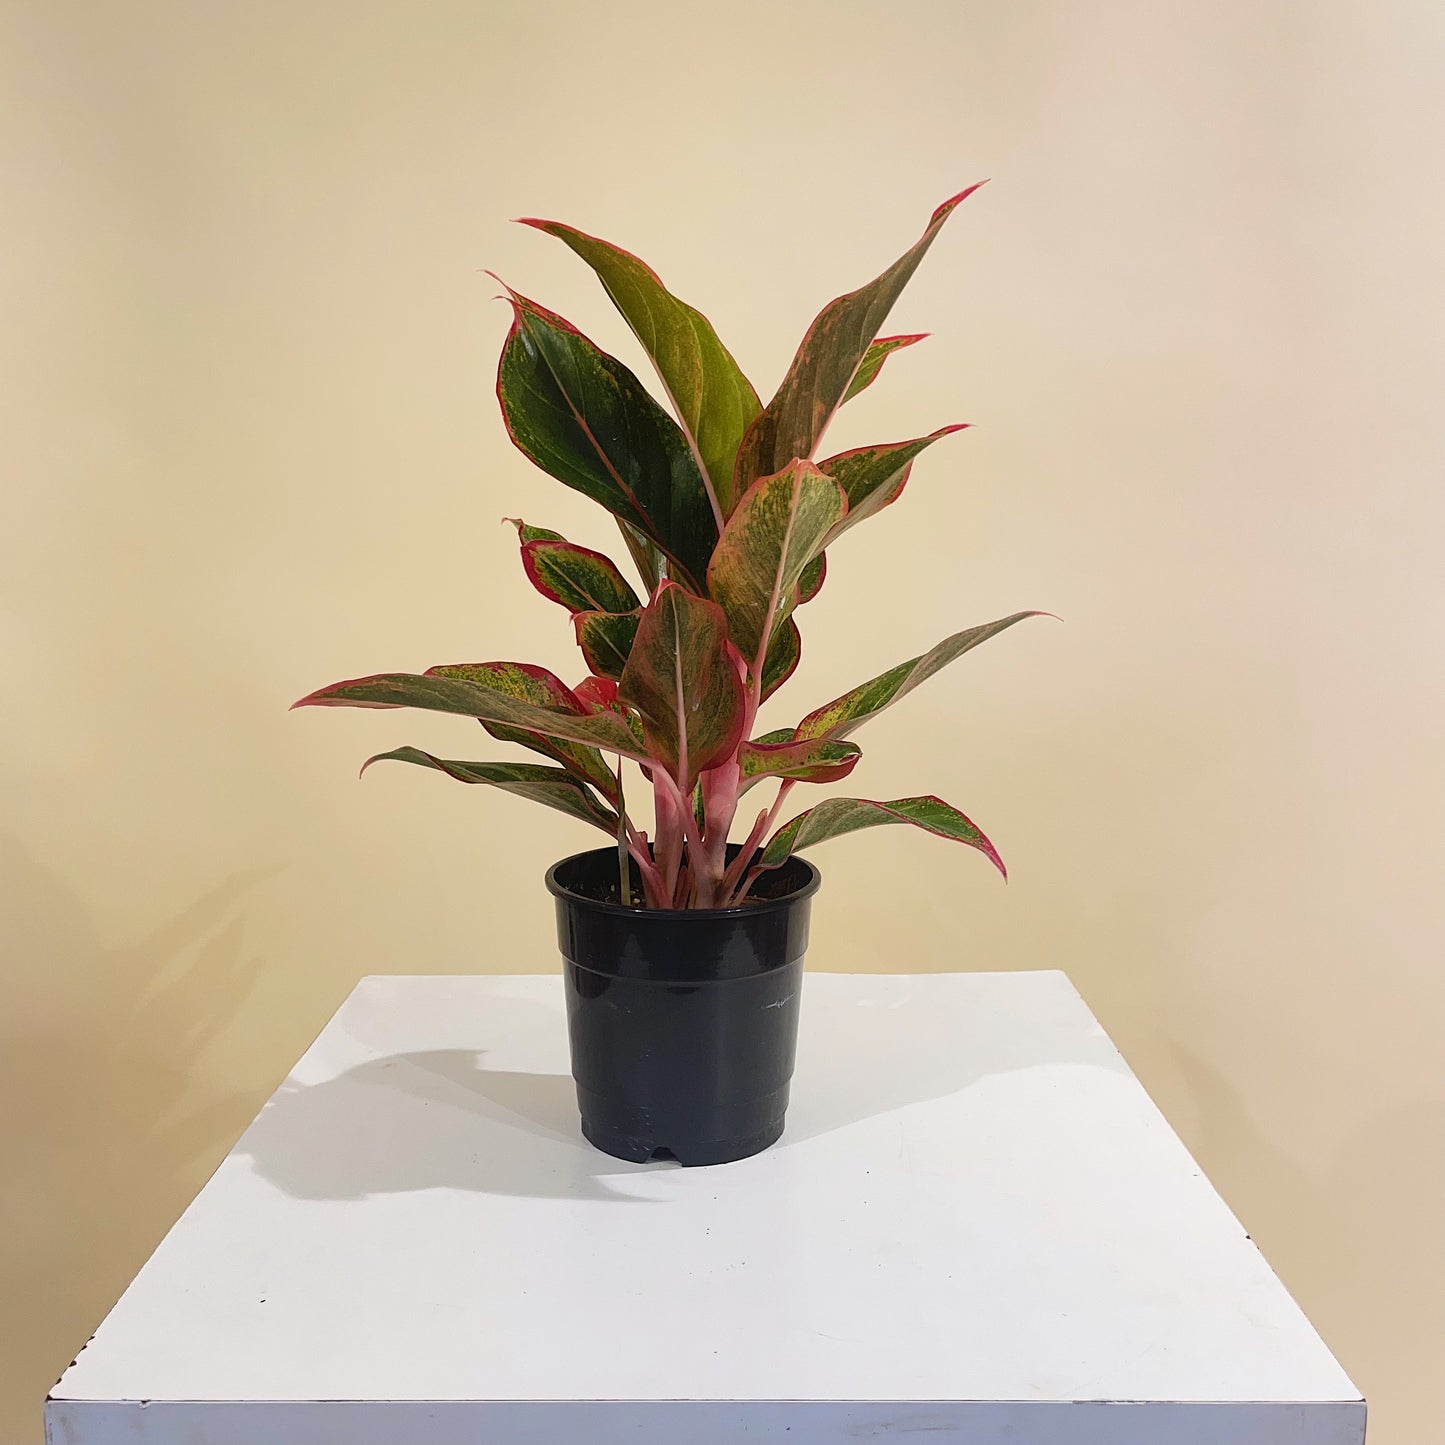 Chinese evergreen, Philippine evergreen (Aglaonema) in a 5 inch pot. Indoor plant for sale by Promise Supply for delivery and pickup in Toronto